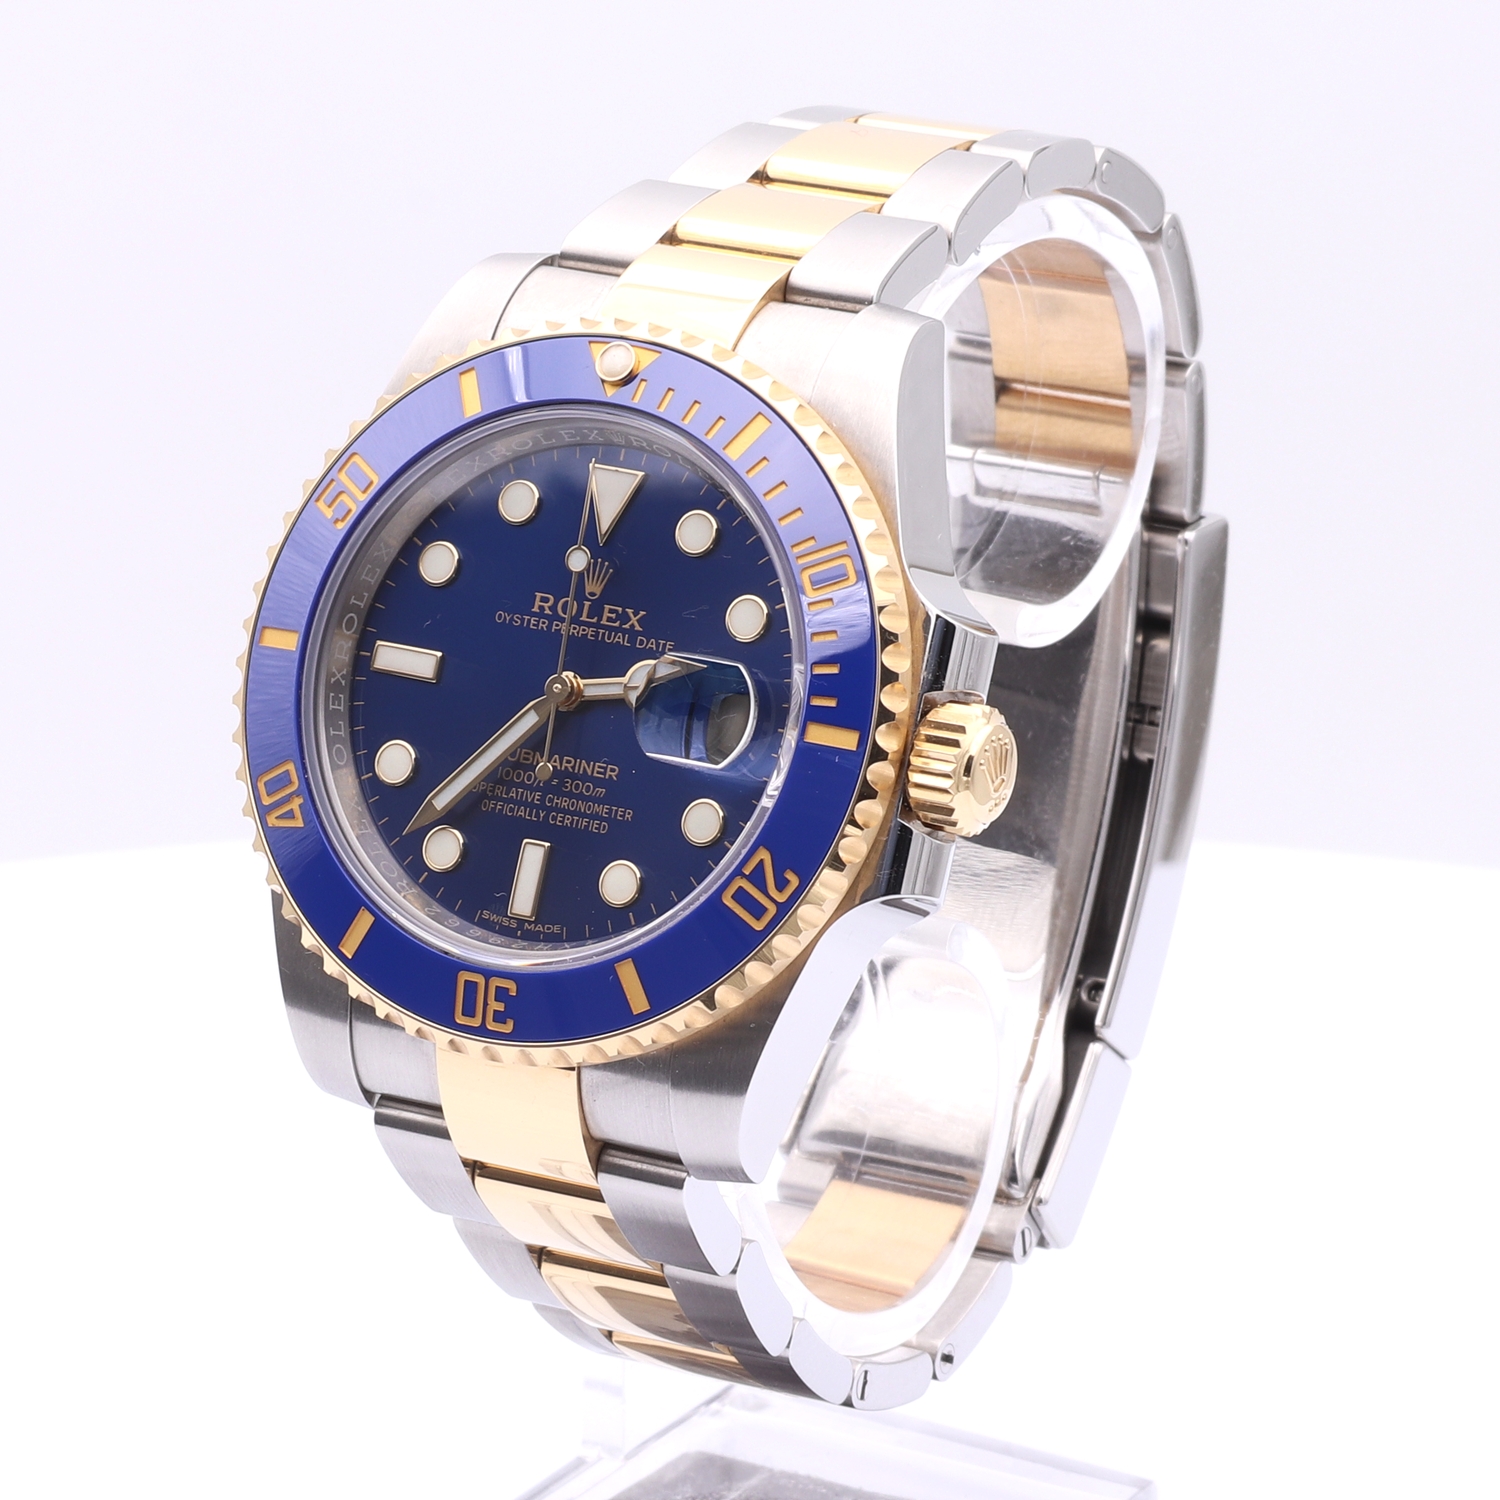 Rolex Submariner Date „Smurf“ Two-Tone 116613LB